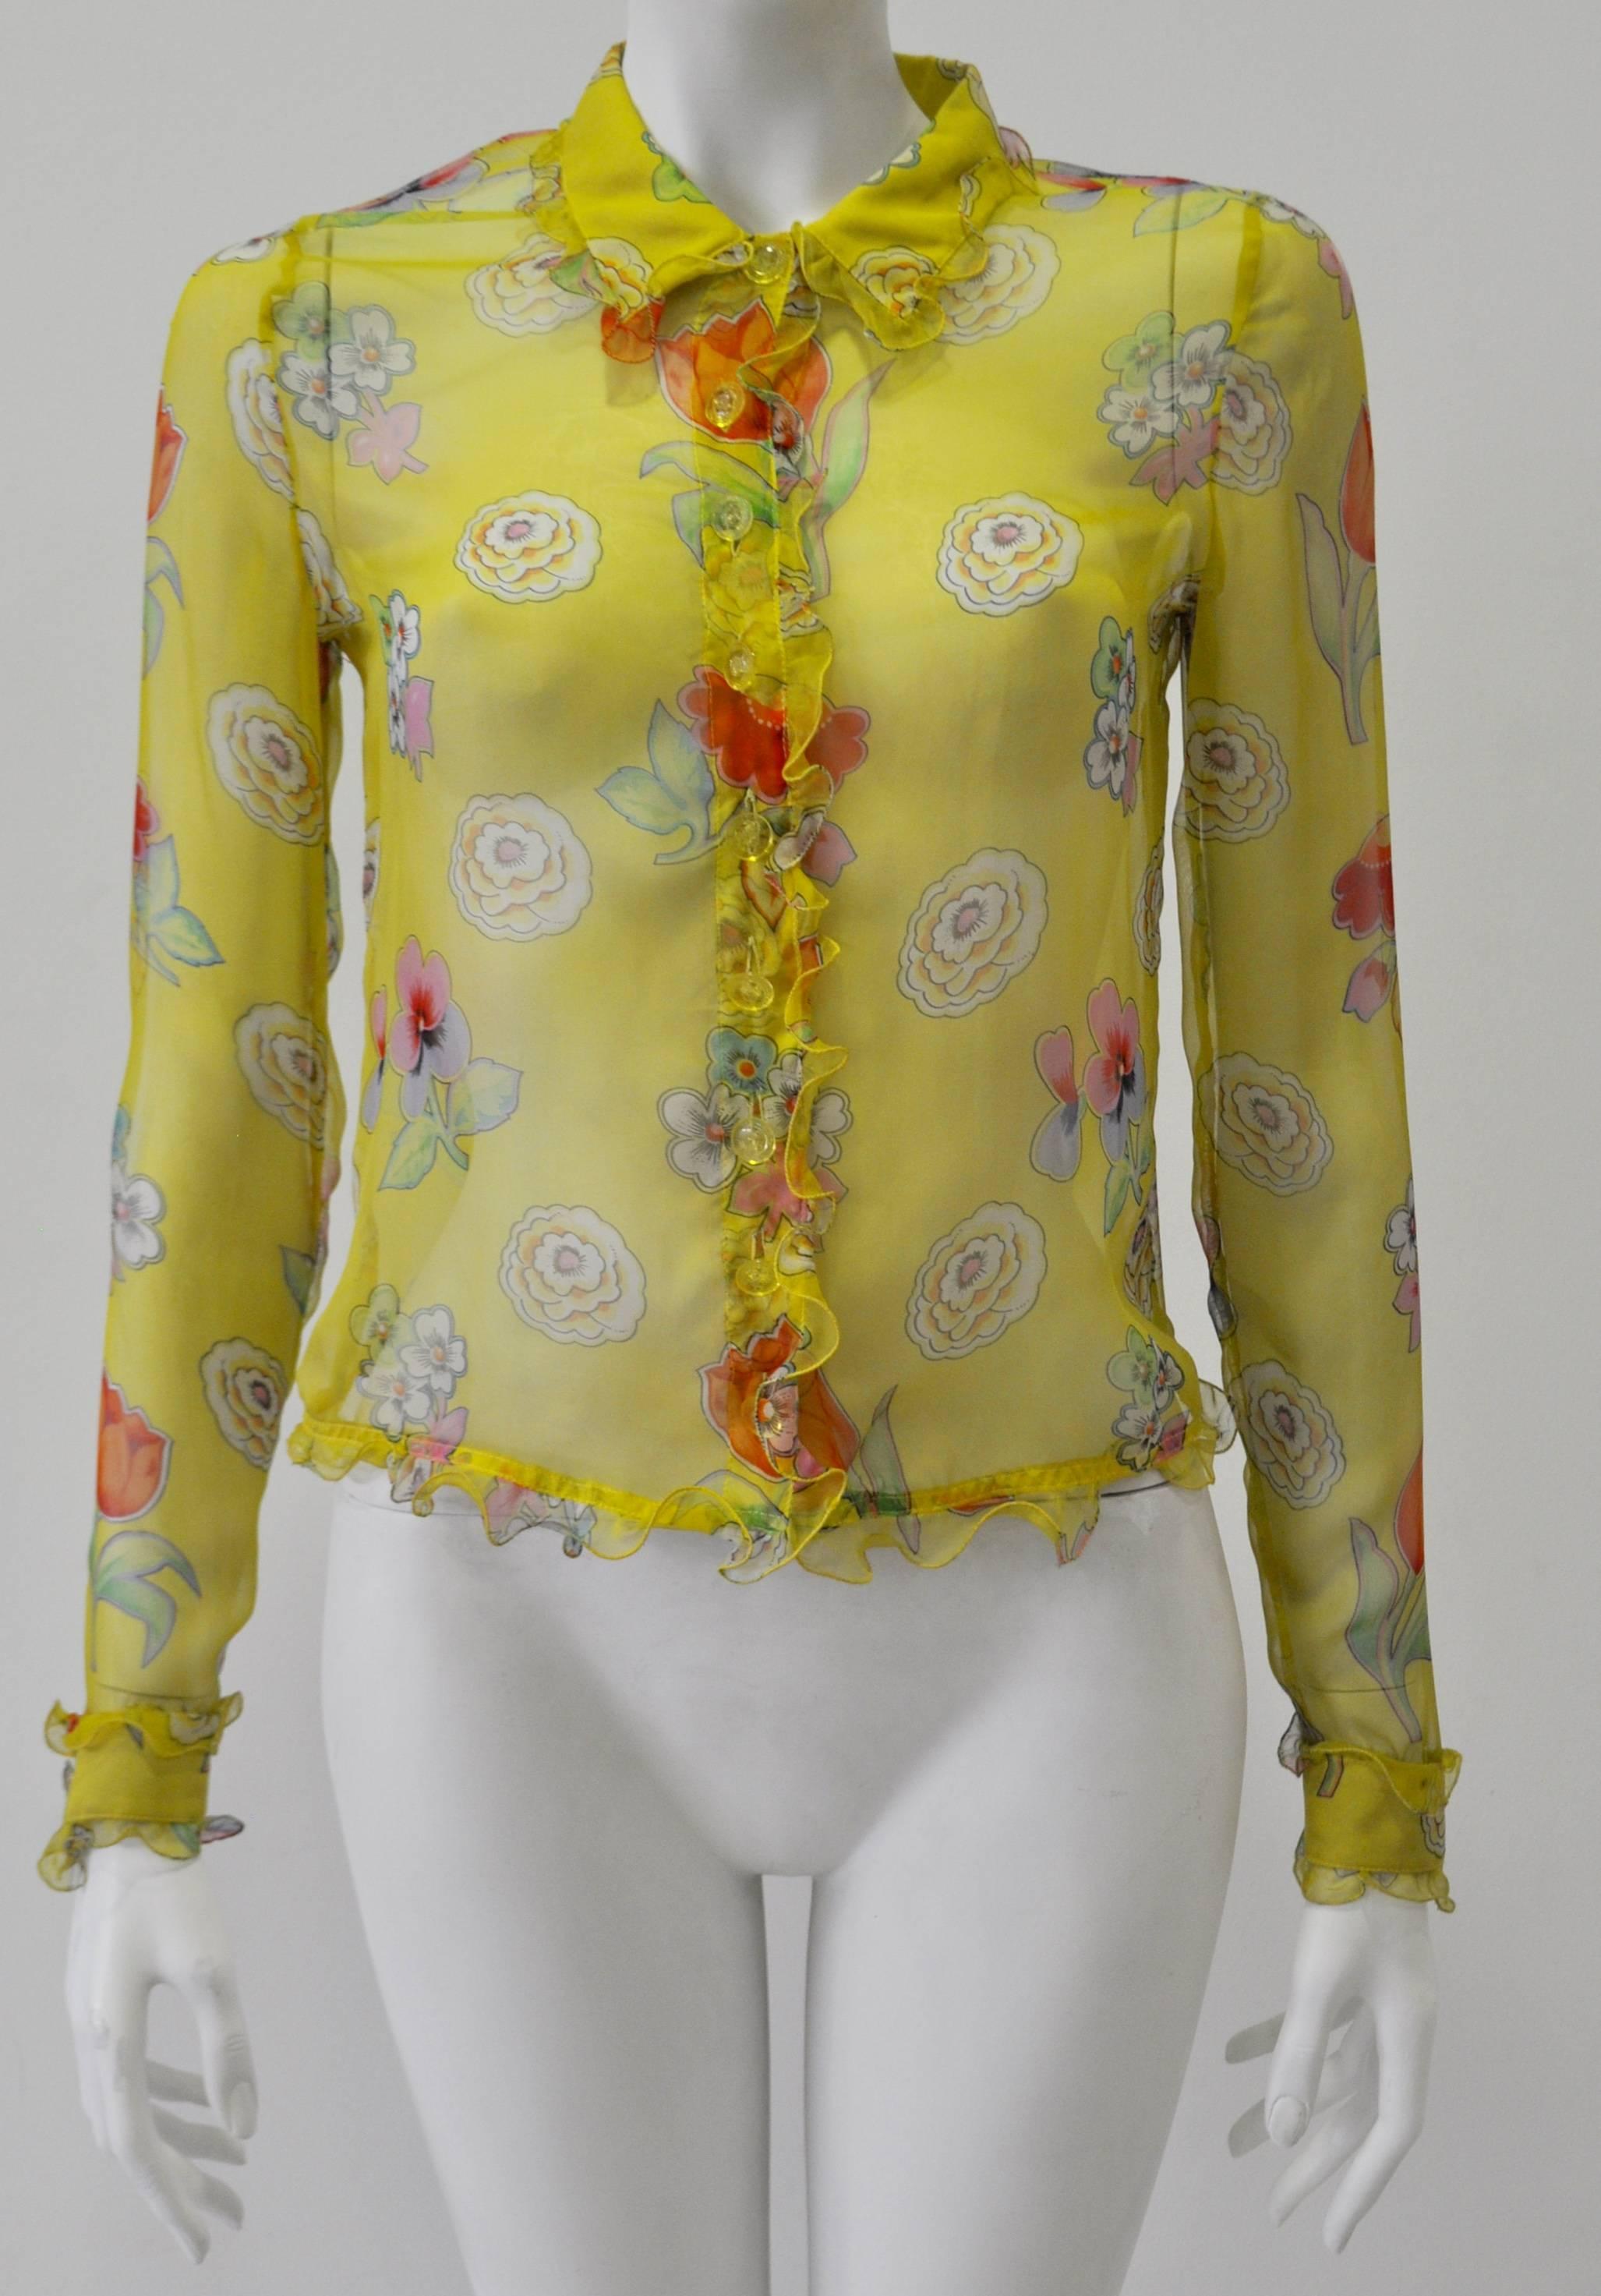 Gianni Versace Couture Sheer Yellow Floral Ruffle Trim 100% Silk Shirt featuring Clear Medusa Buttons, Spring 1997